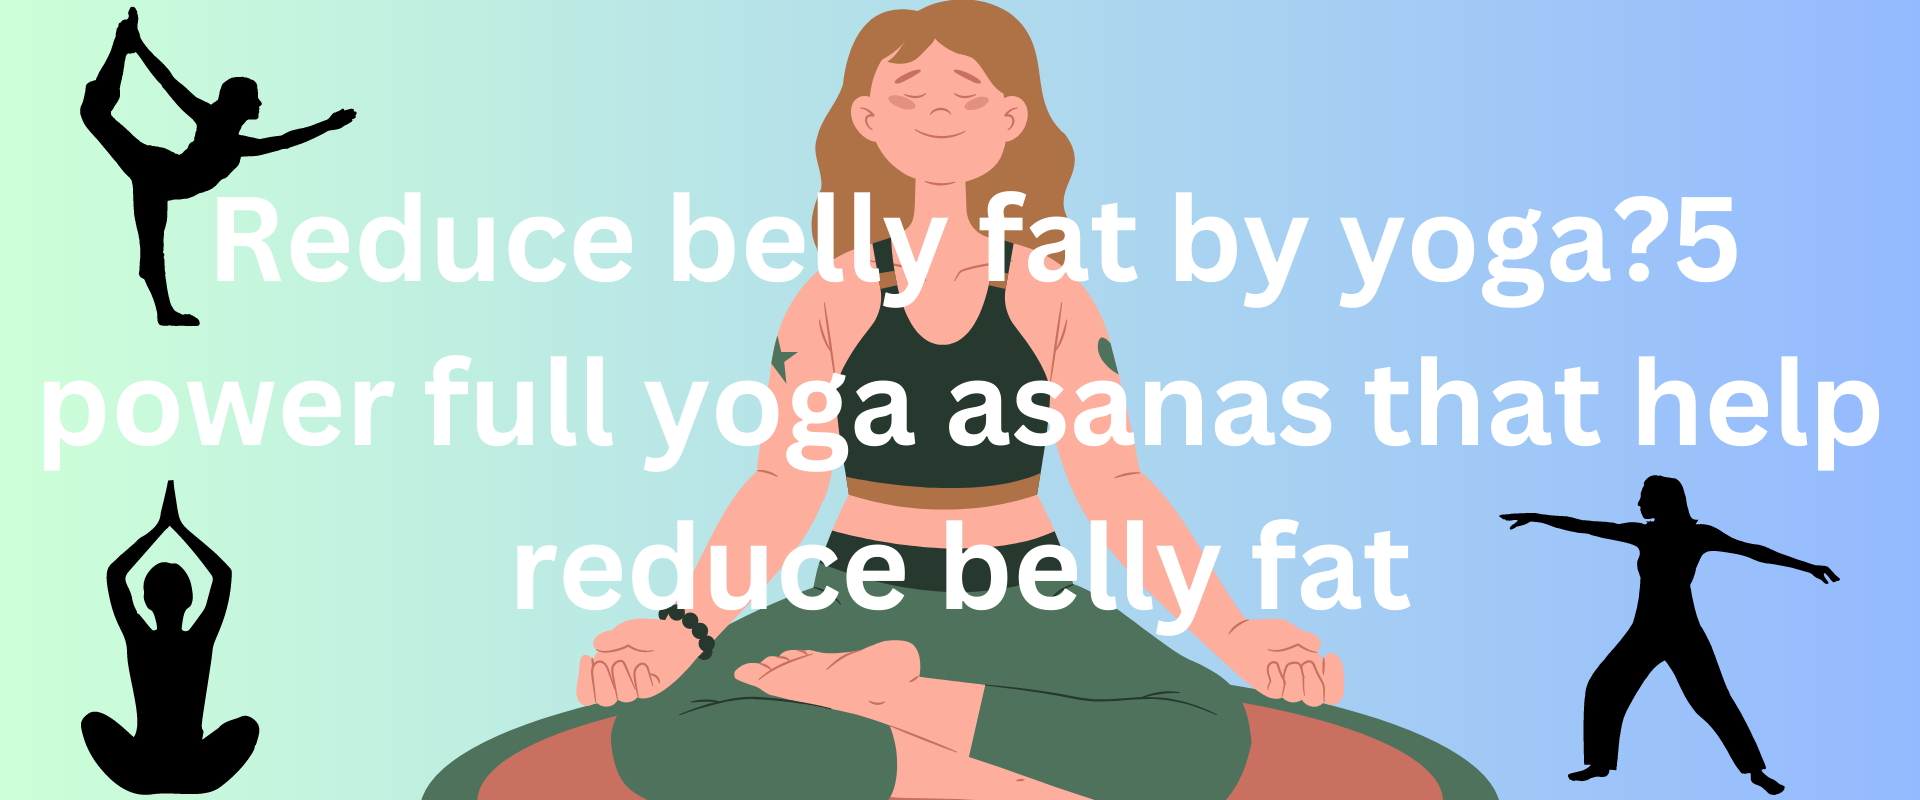 You are currently viewing Reduce belly fat by yoga?5 power full yoga asanas that help reduce belly fat